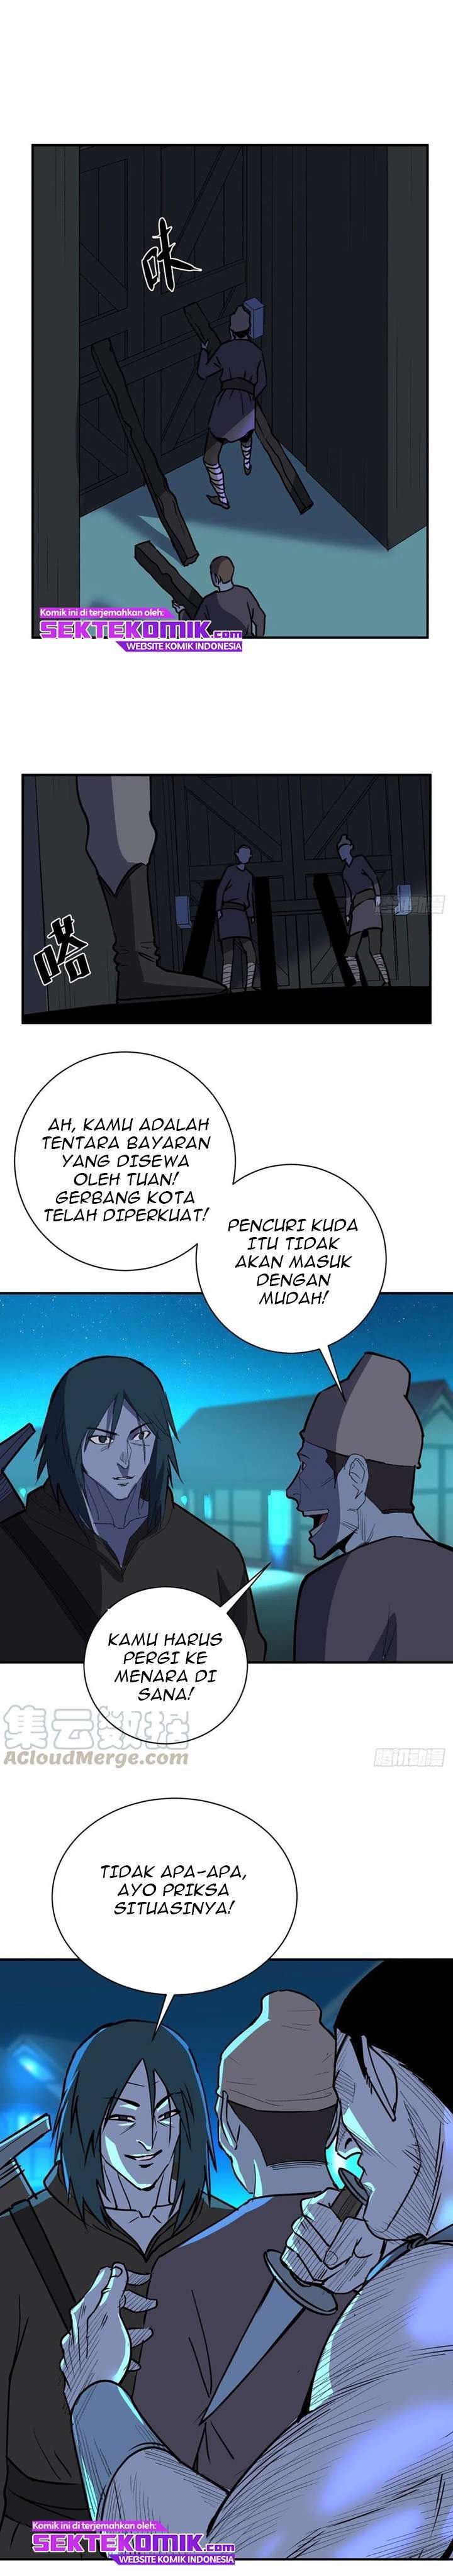 Limin Diguo Chapter 7